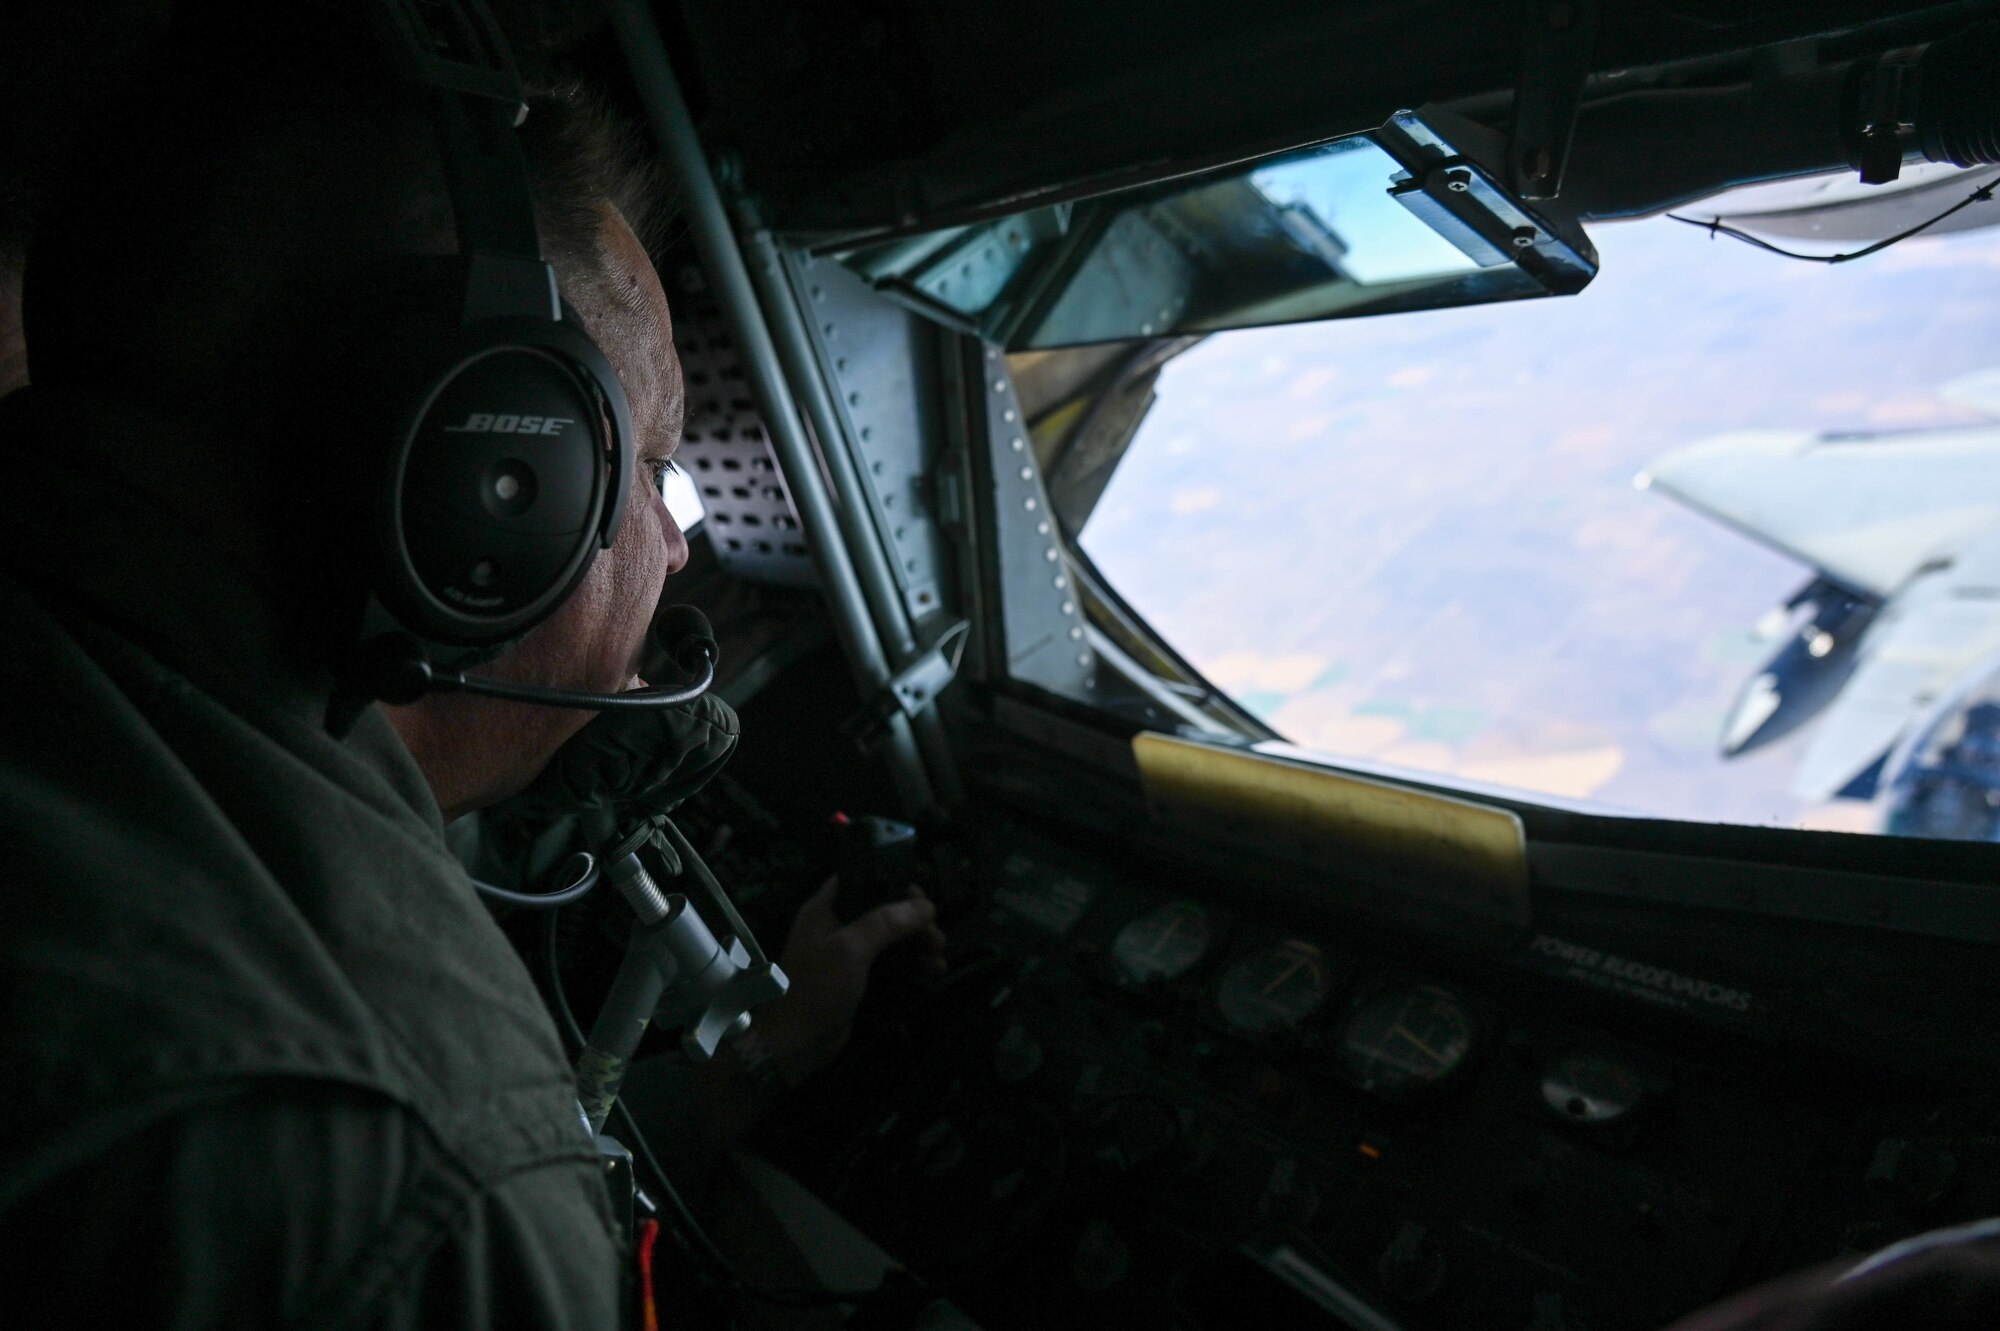 Chief Master Sgt. Steven Robinson, 465th Air Refueling Squadron boom operator, refuels an F-15 during a training sortie from Tinker Air Force Base, Oklahoma, Oct. 15, 2021. (U.S. Air Force photo by 2nd Lt. Mary Begy)